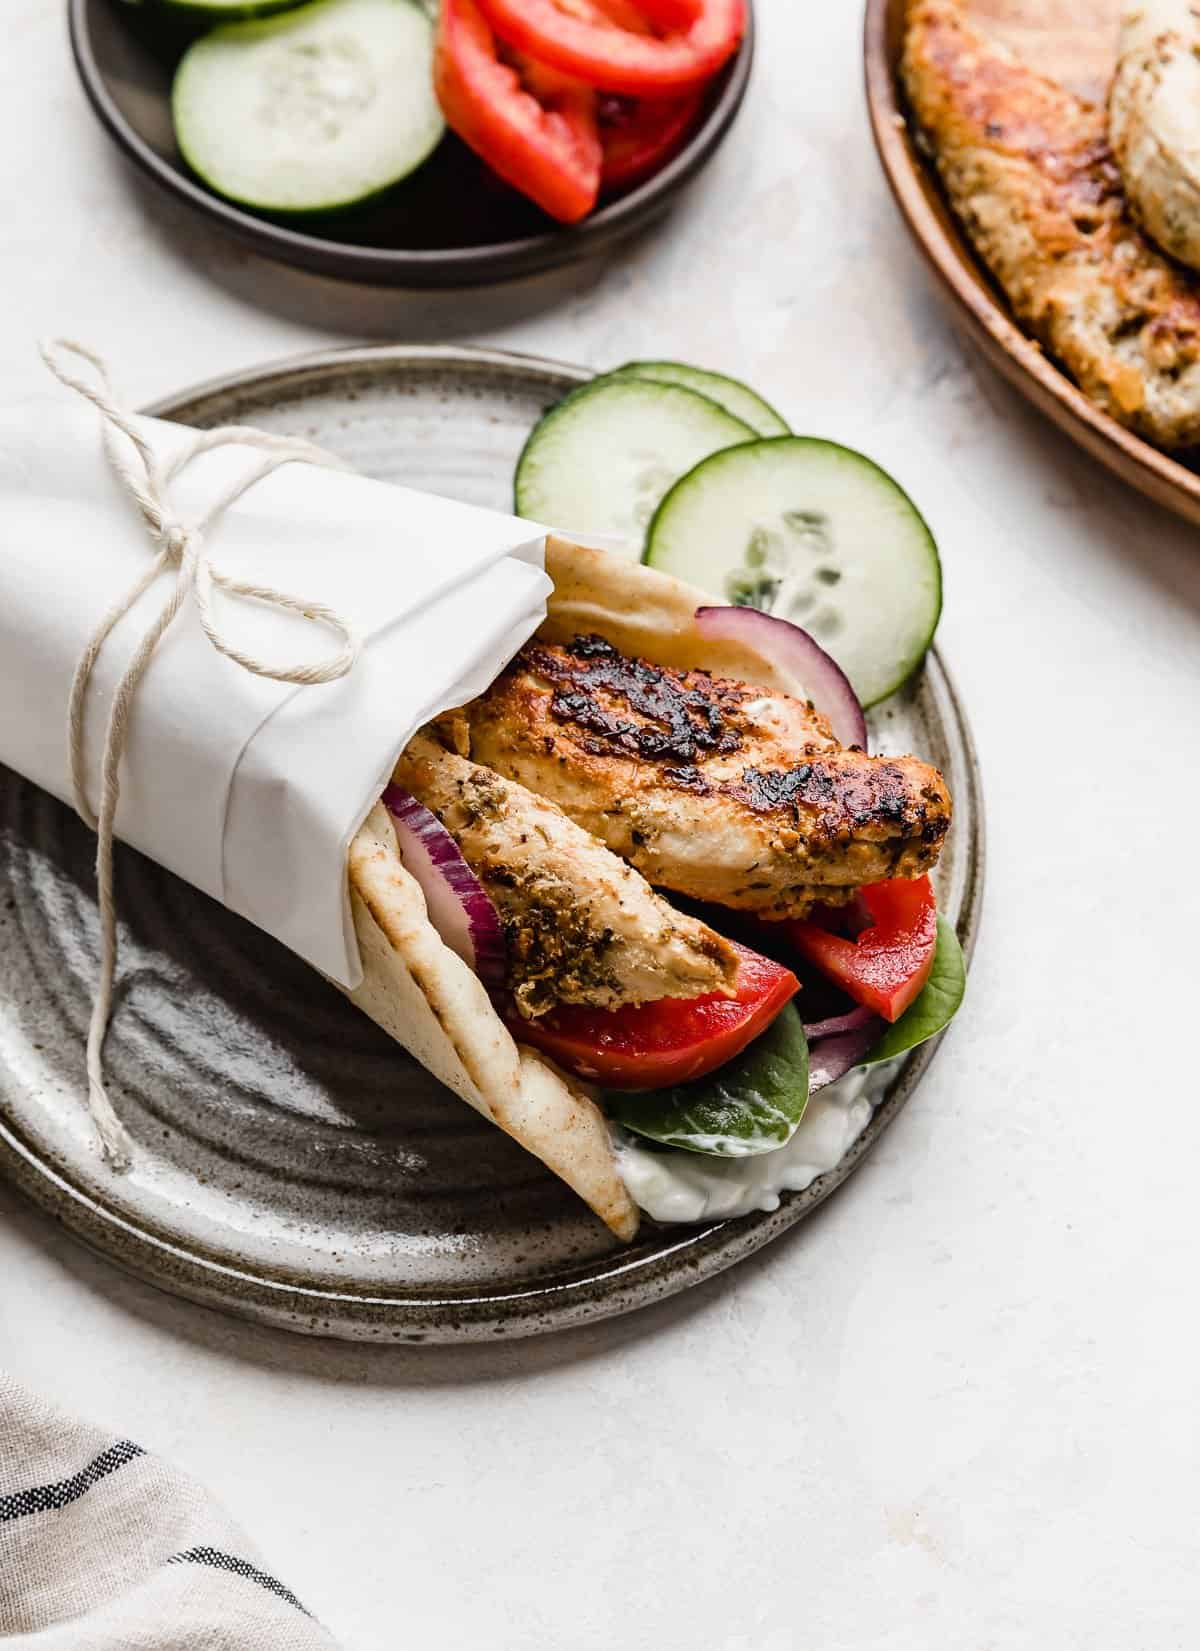 A chicken gyro made with chicken tenders wrapped in white parchment paper, on a grey plate.